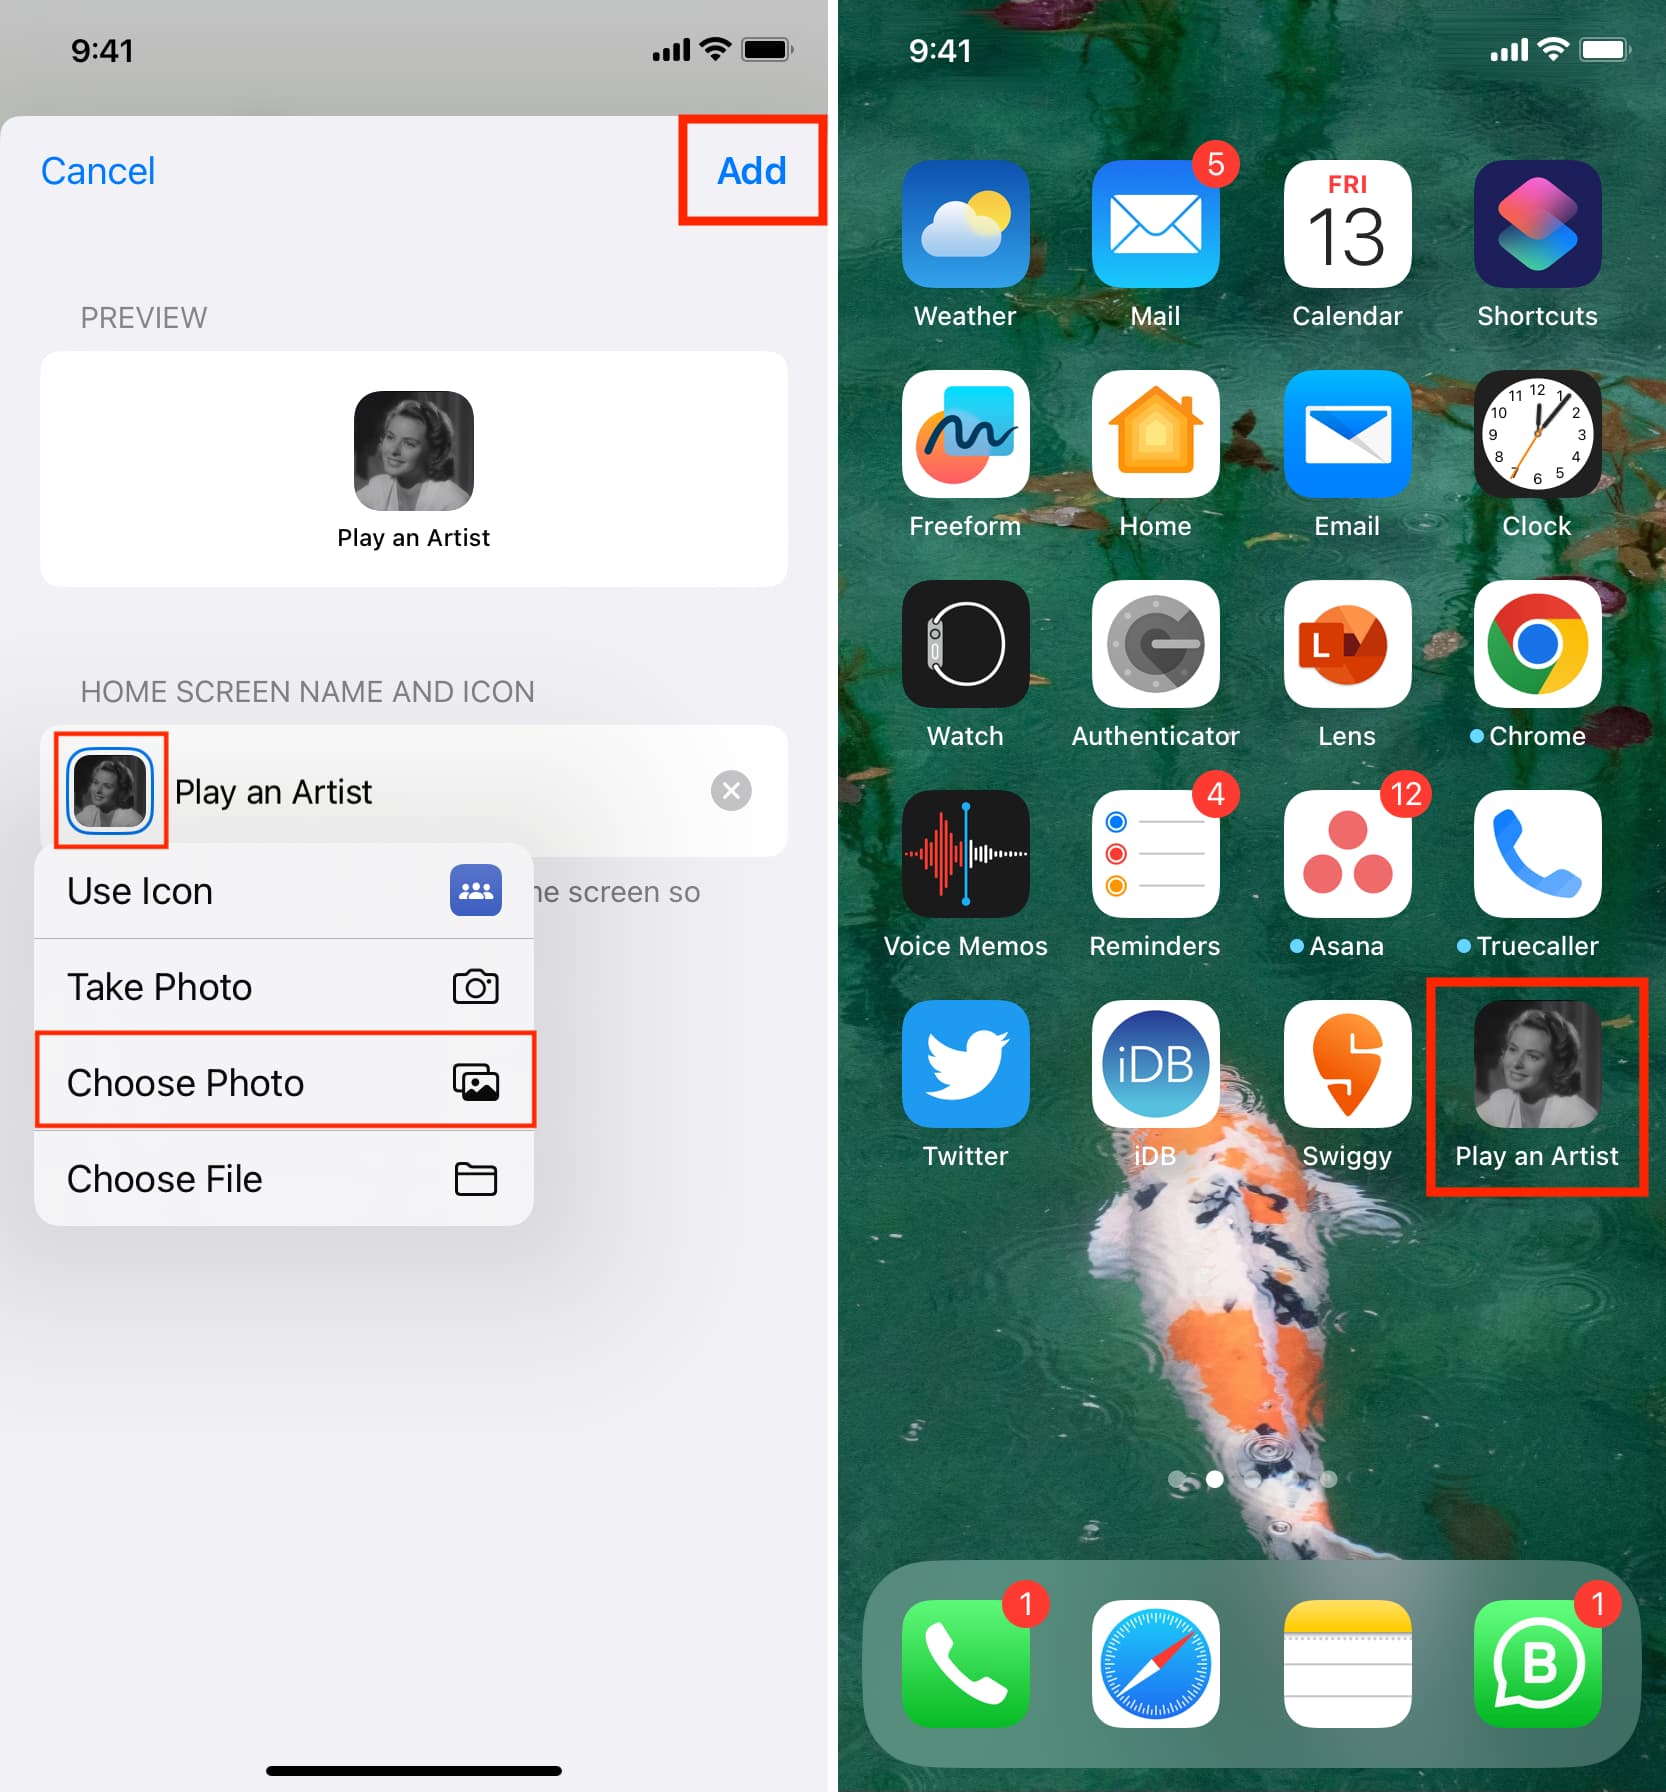 Shortcut added to iPhone Home Screen